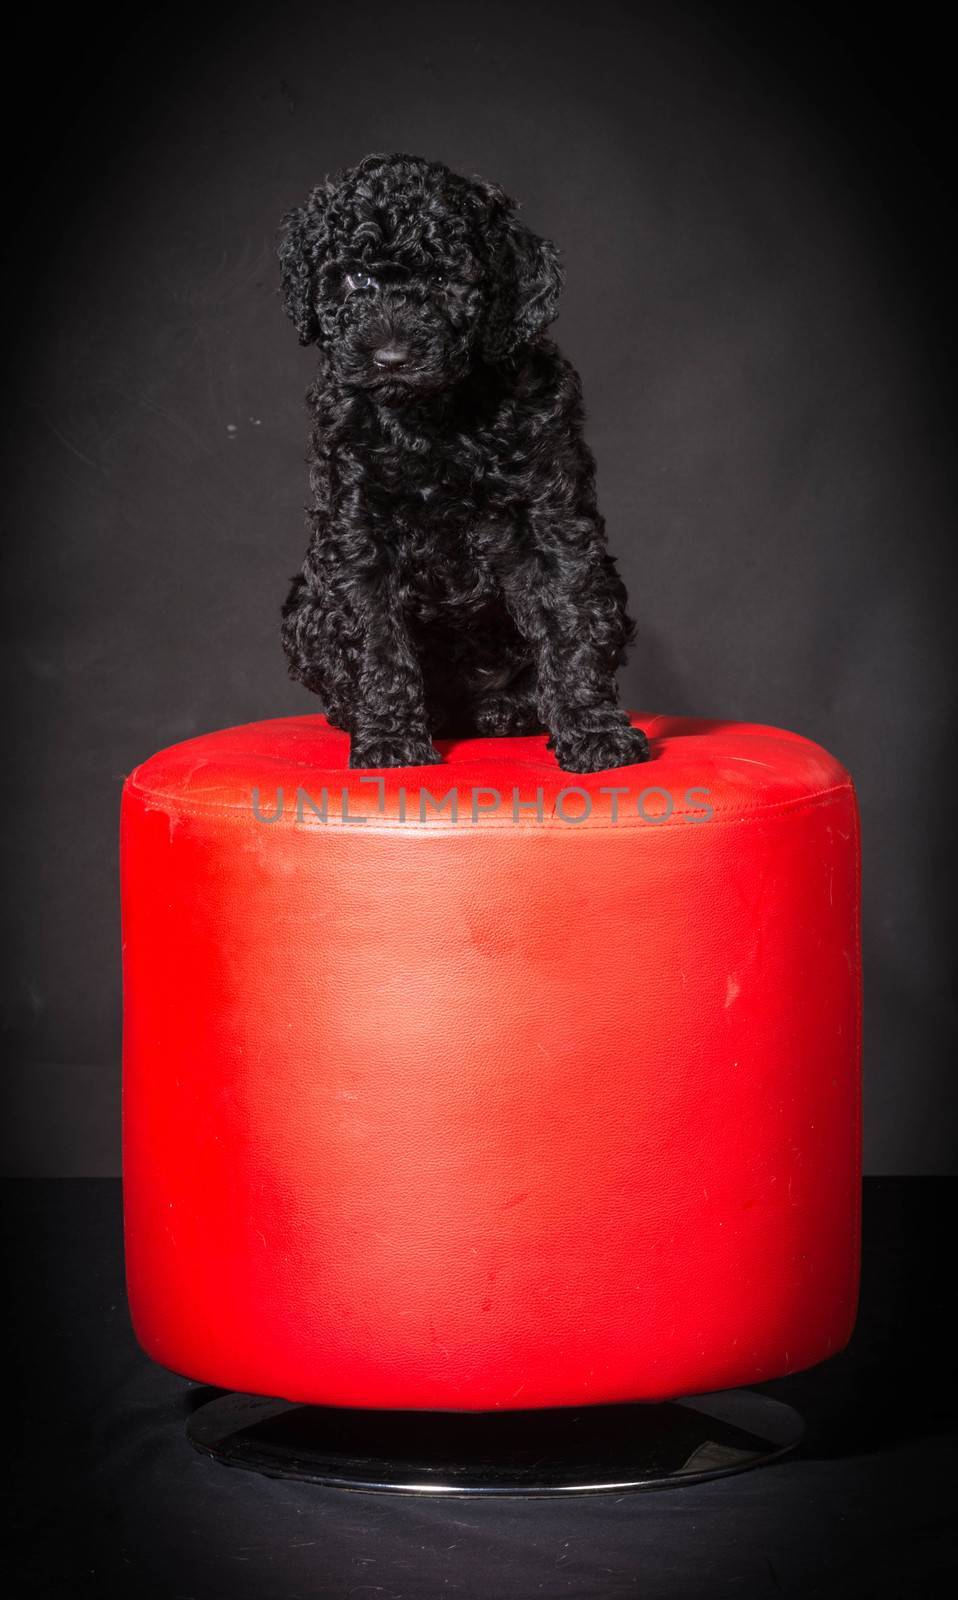 barbet puppy sitting on red stool on black background